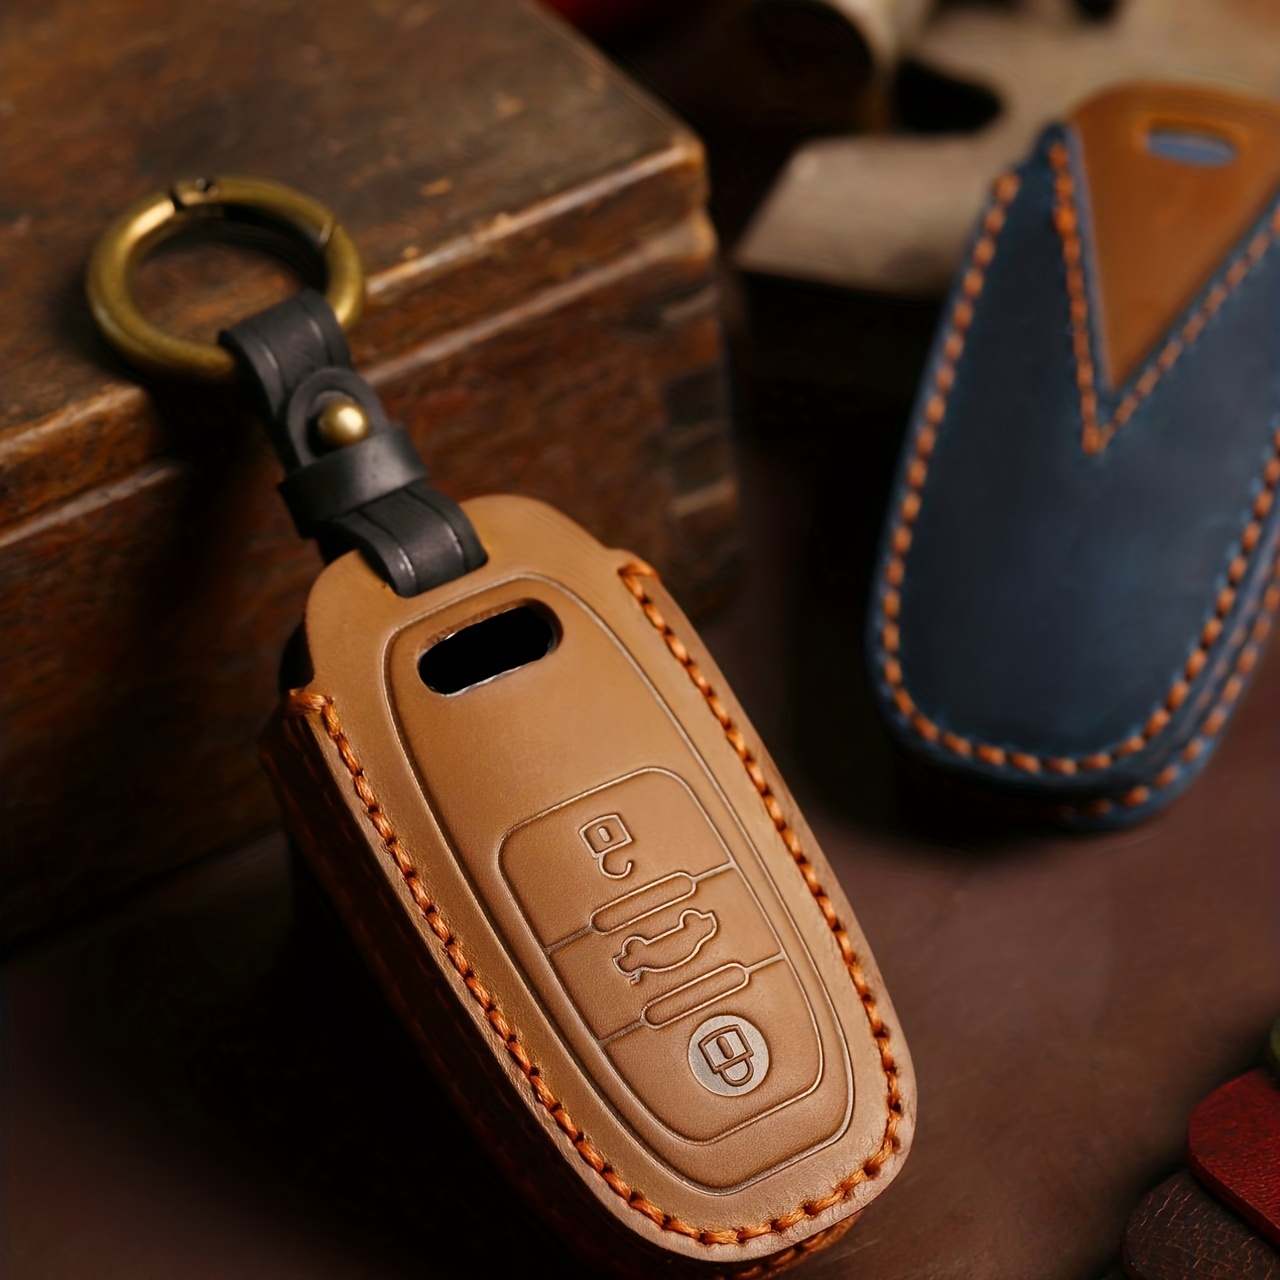  handmade Keychain leather Protective Key Case Cover